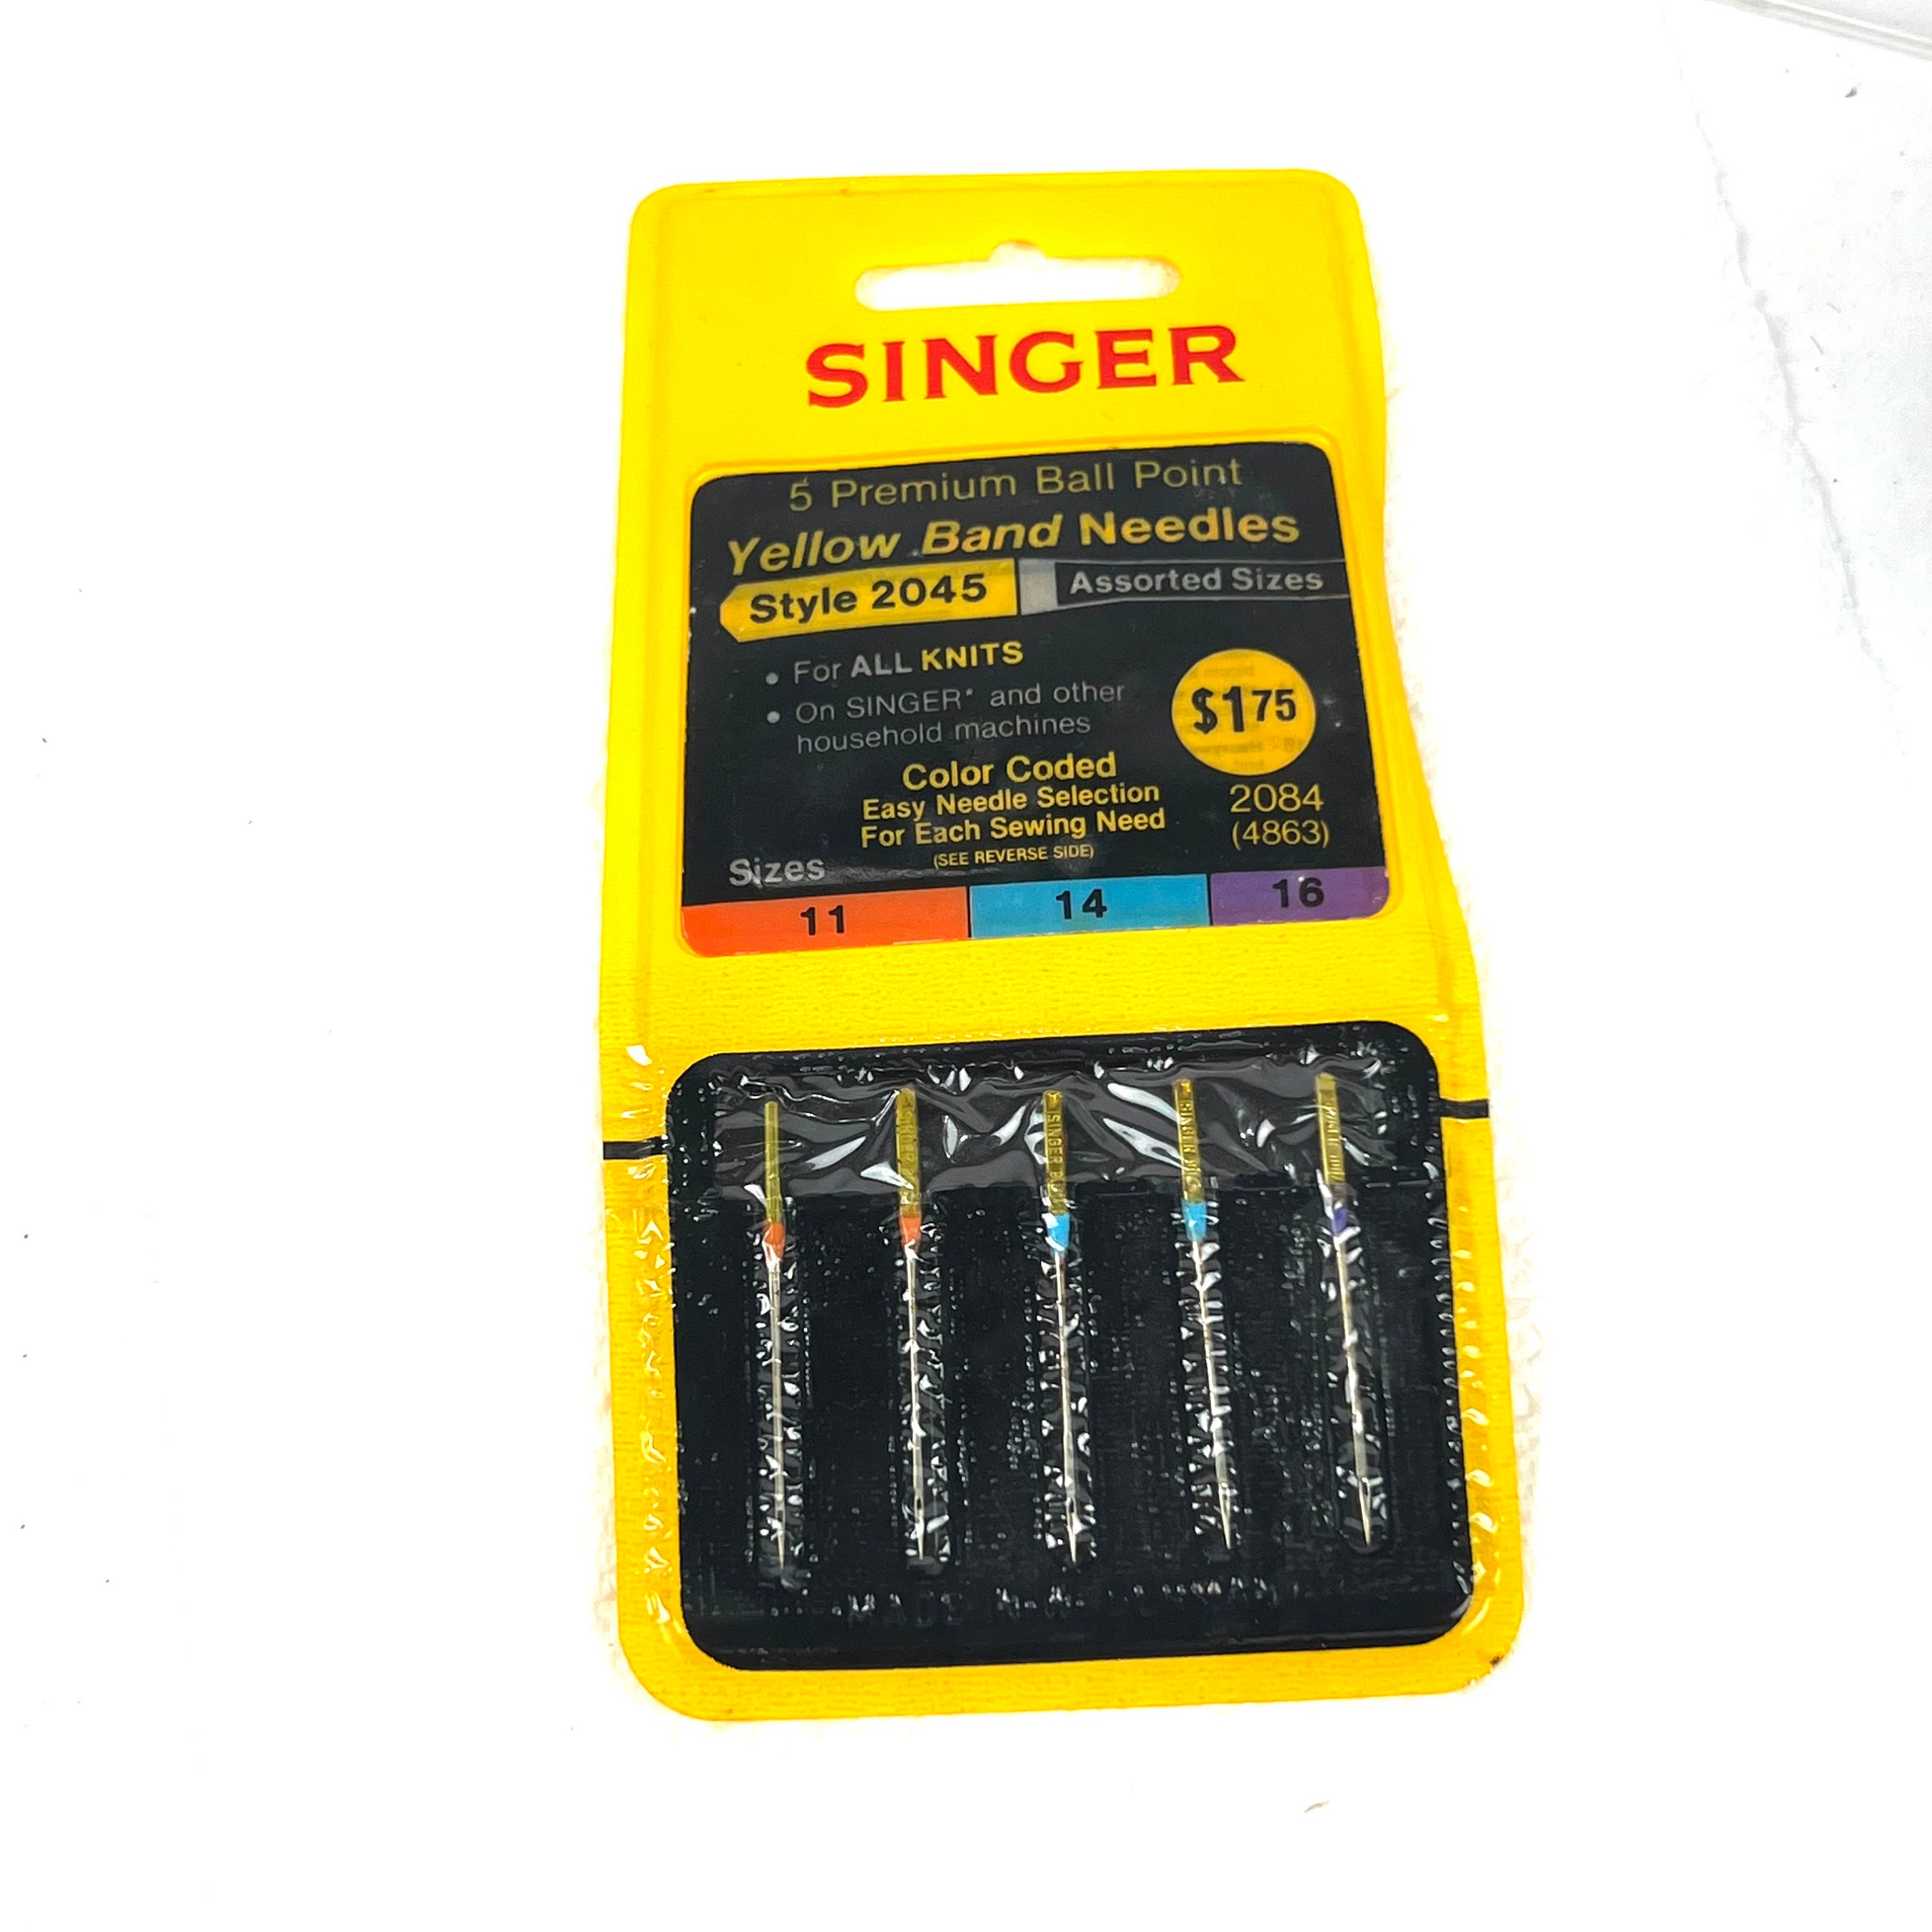 Singer Sewing Machine Needles 2045 Yellow Band Size 11/80 (25 Count) 